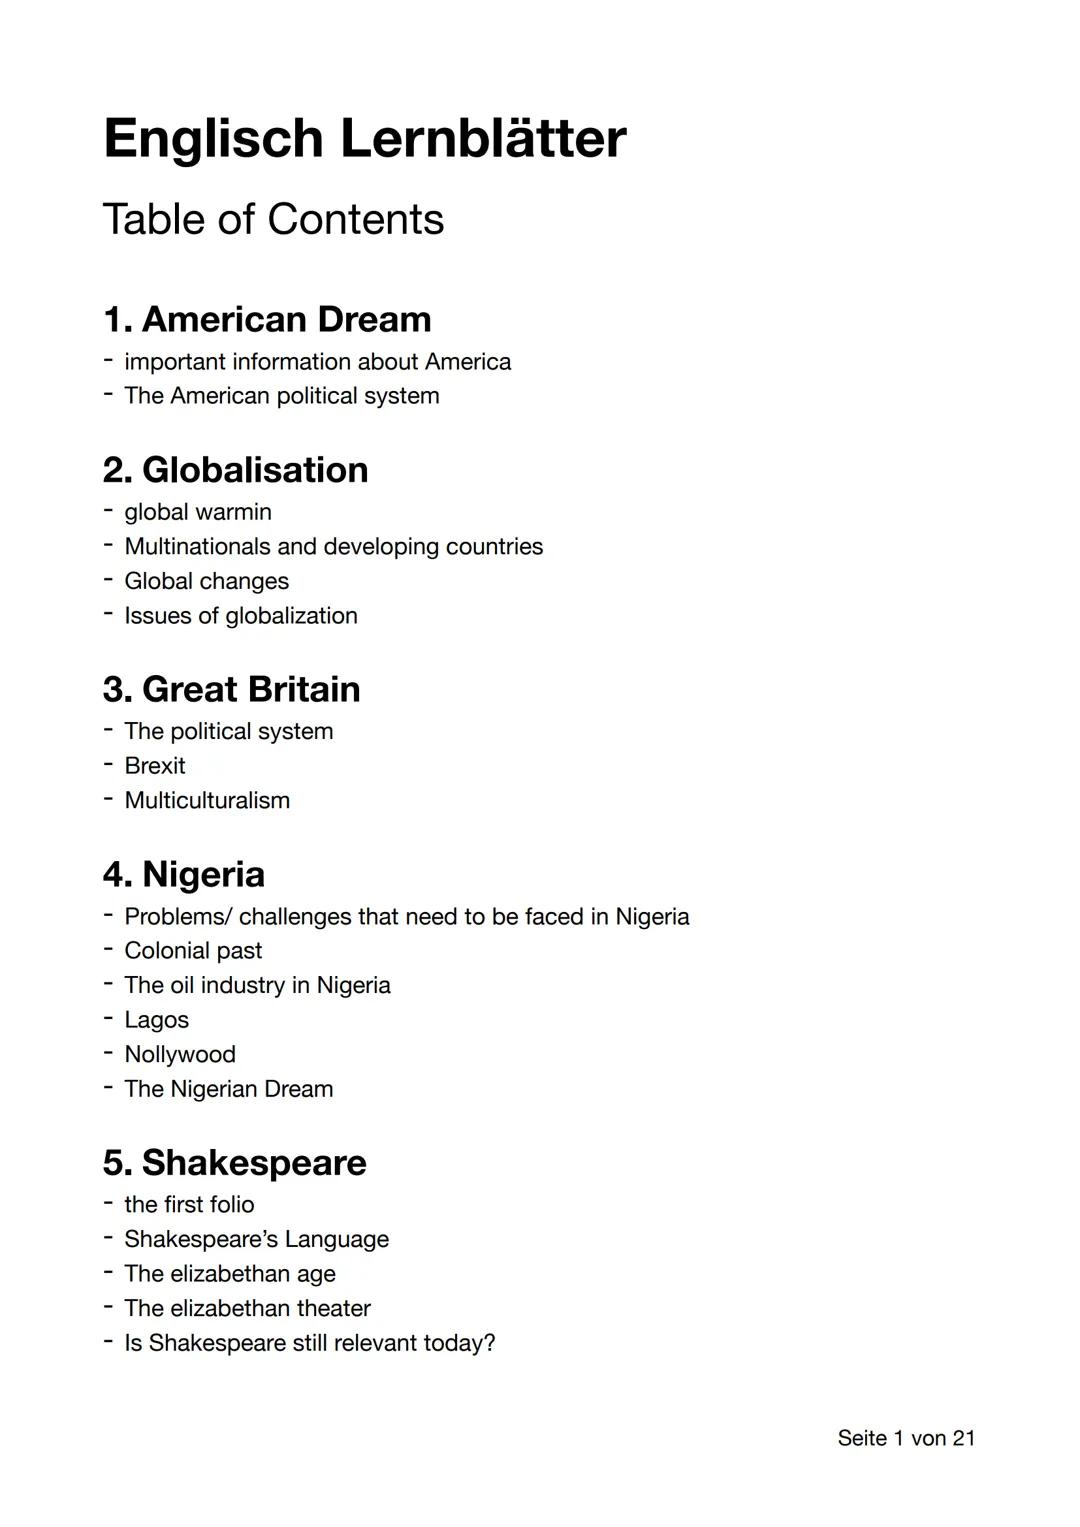 Englisch Lernblätter
Table of Contents
1. American Dream
- important information about America
- The American political system
2. Globalisat